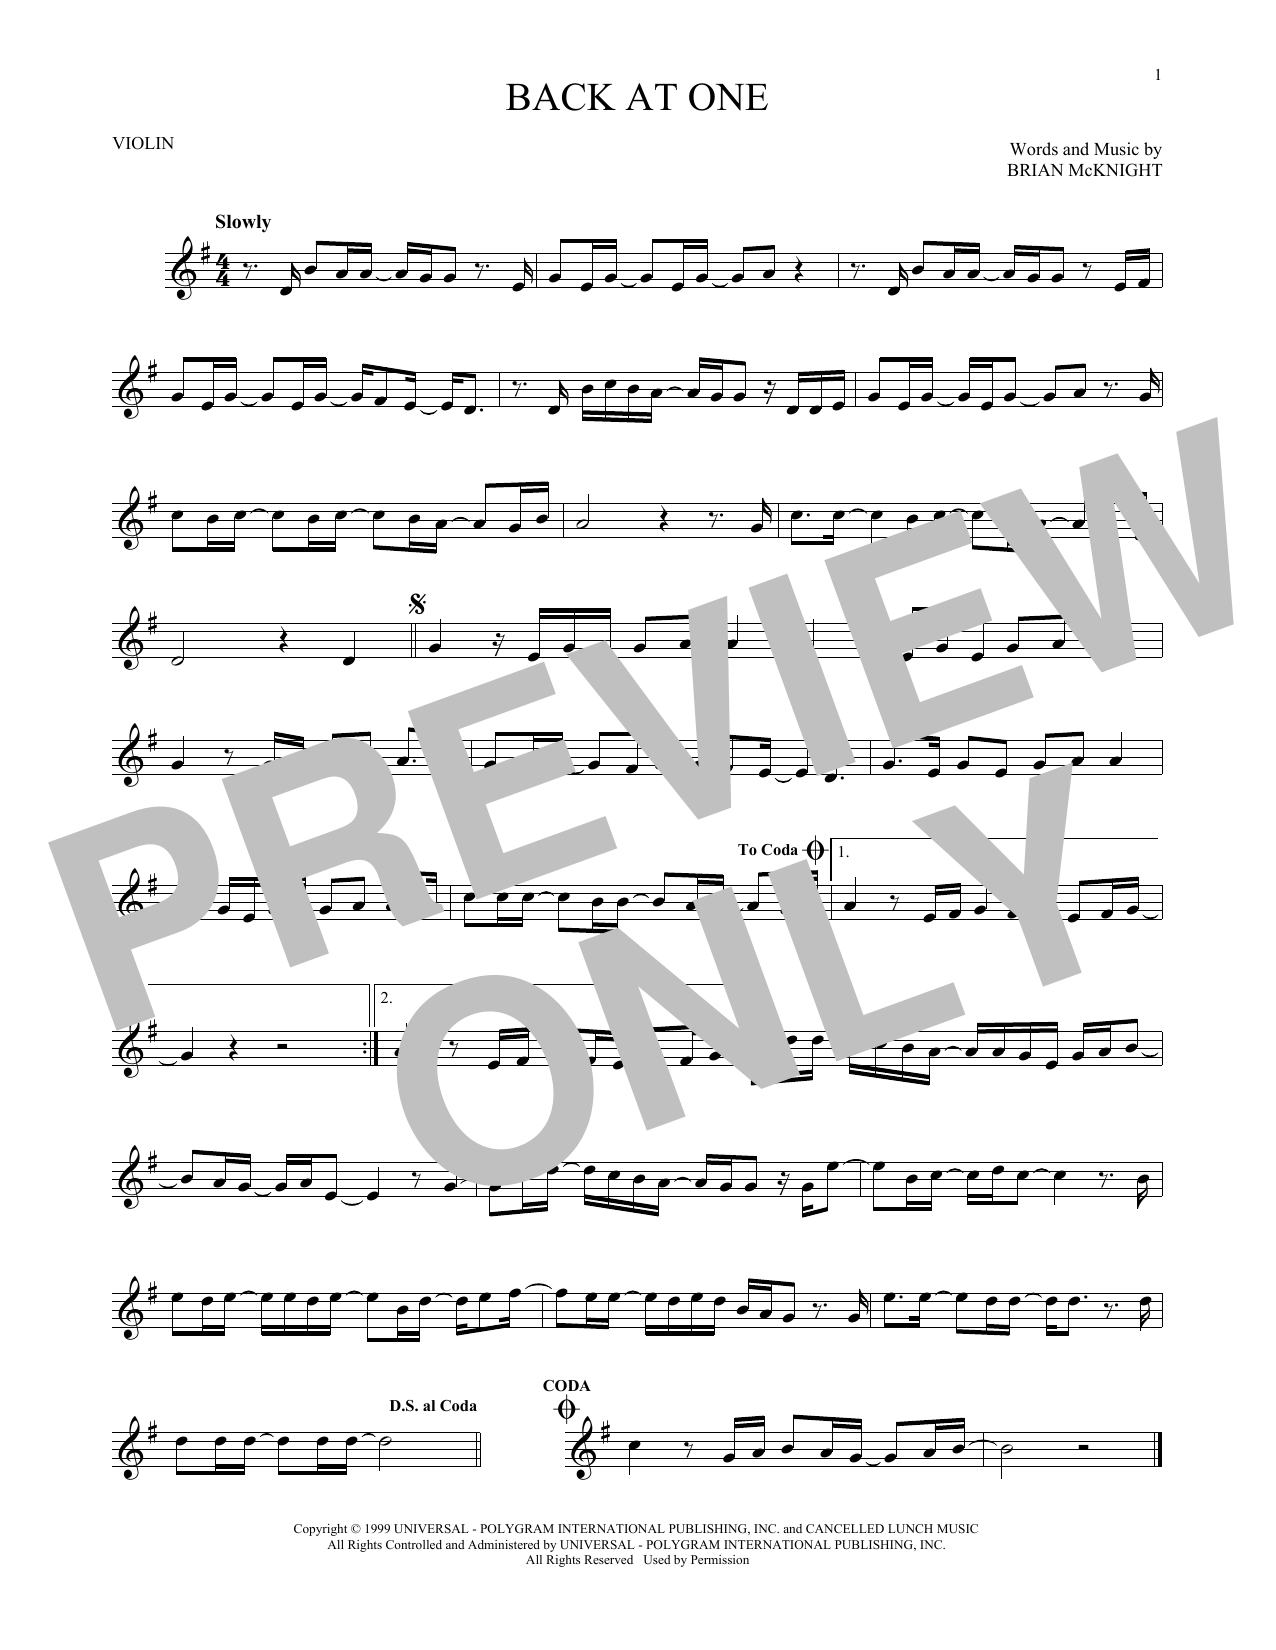 Brian McKnight Back At One sheet music notes and chords. Download Printable PDF.